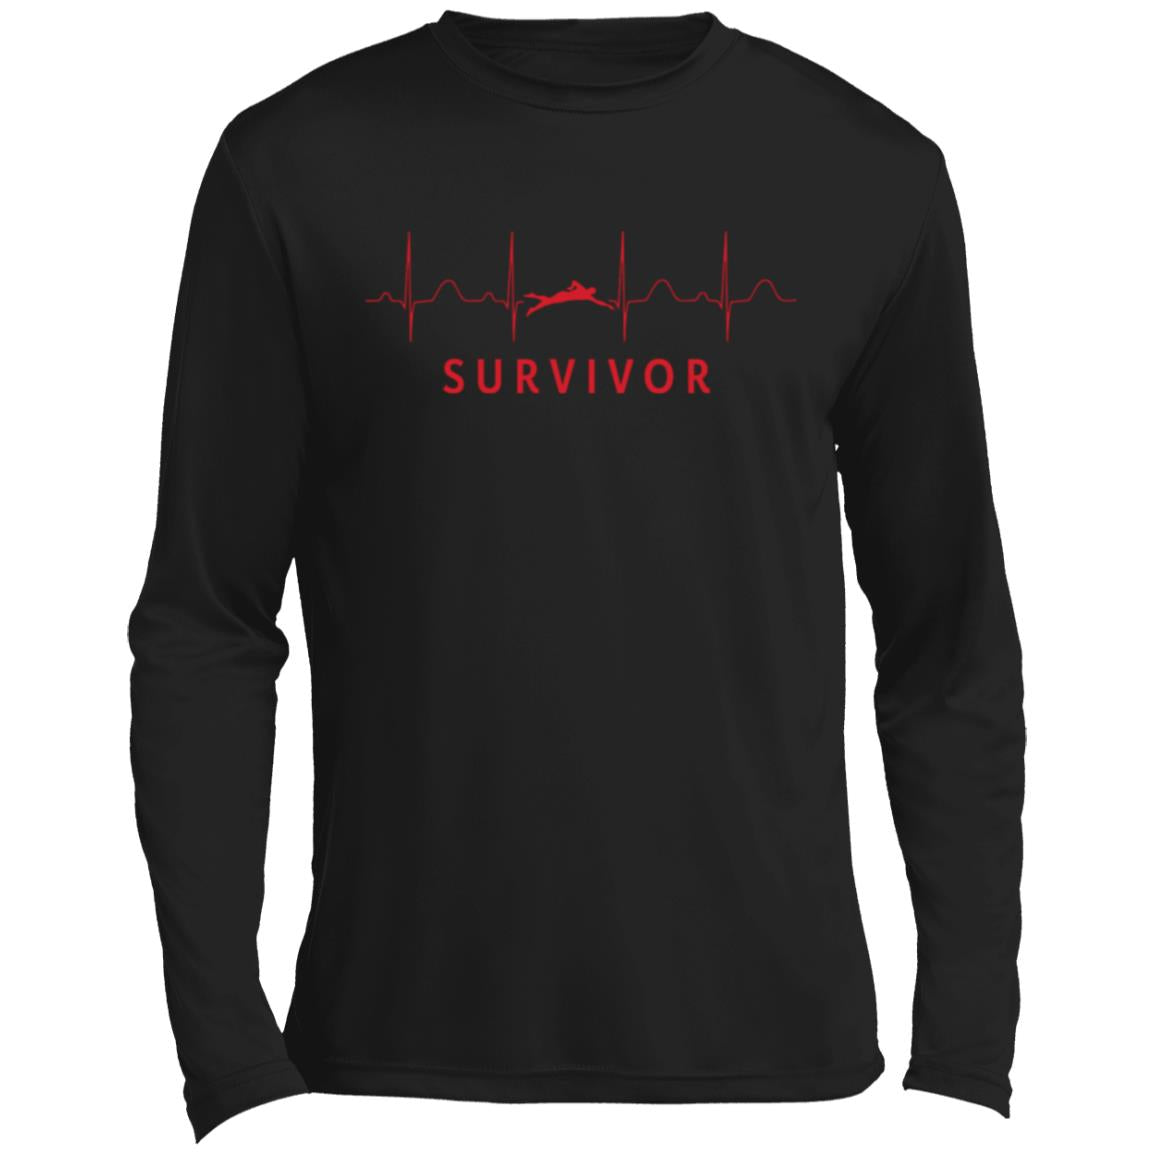 Black long-sleeve tee with SURVIVOR text along with a swimmer icon with EKG lines behind